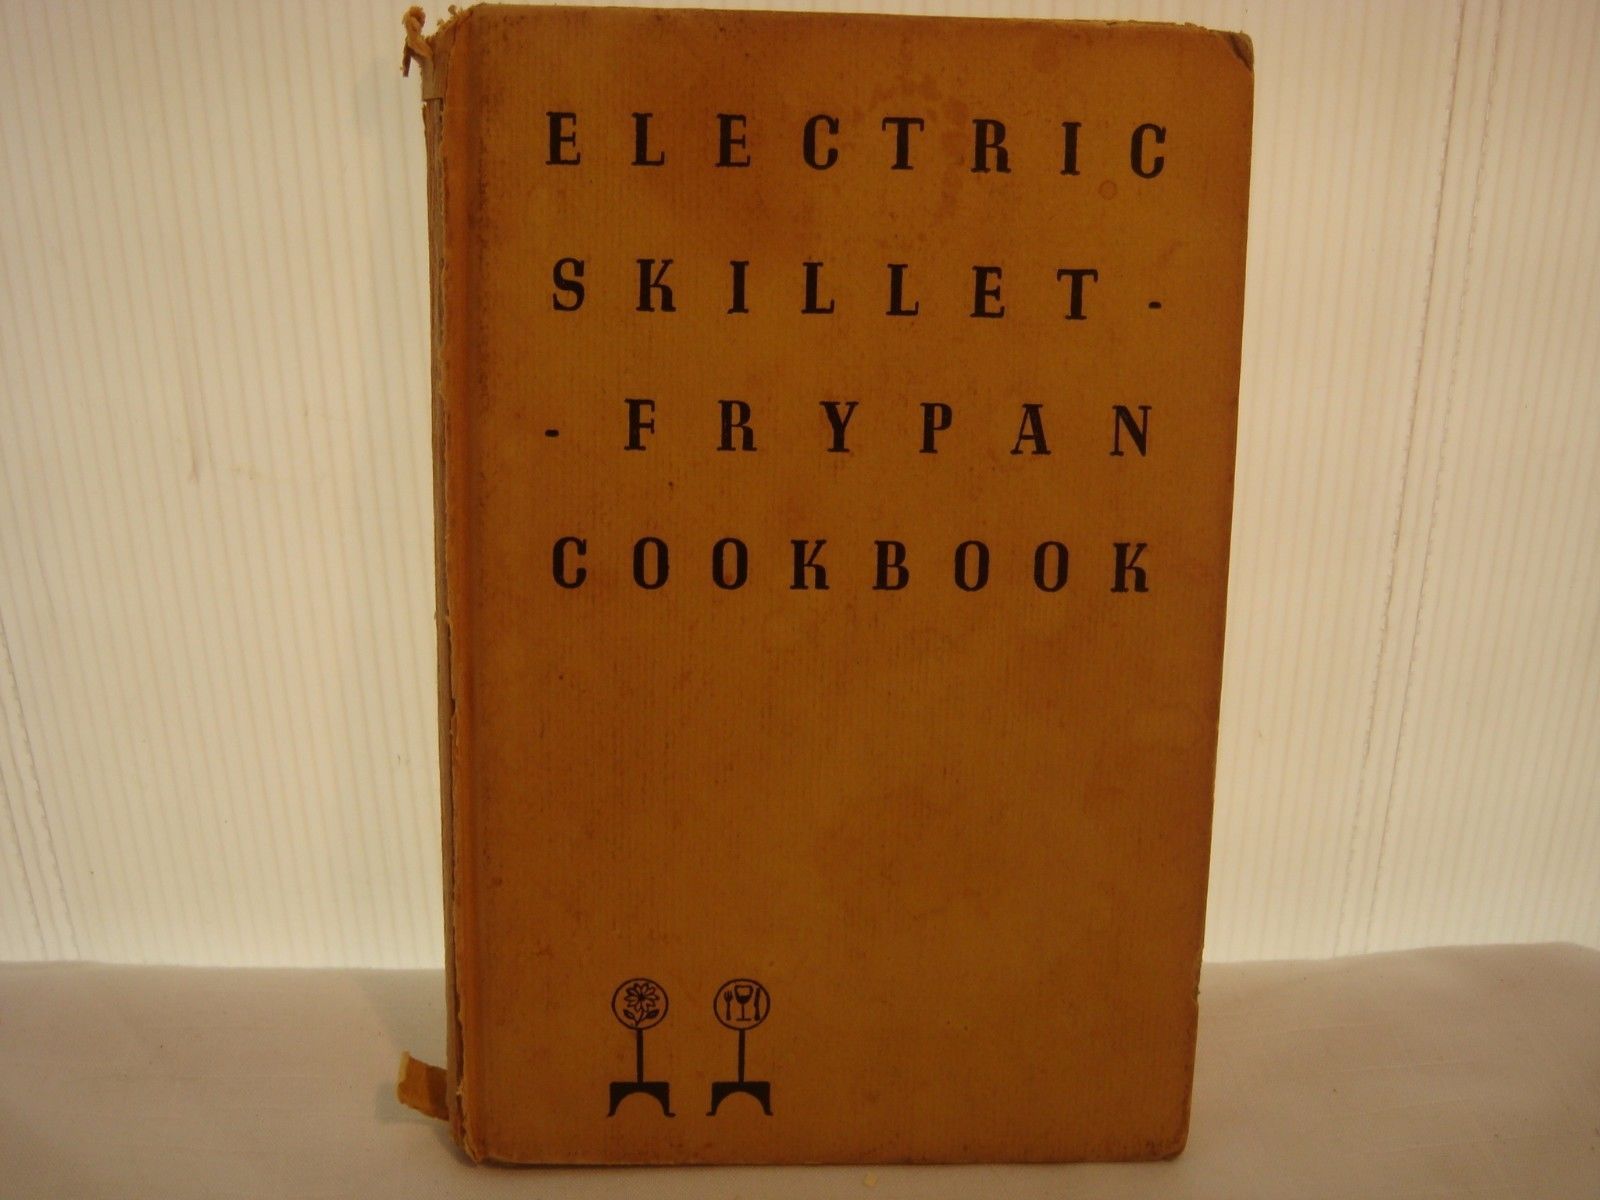 ELECTRIC SKILLET FRYPAN COOKBOOK 1955 by Roberta Ames WOW! - $21.95